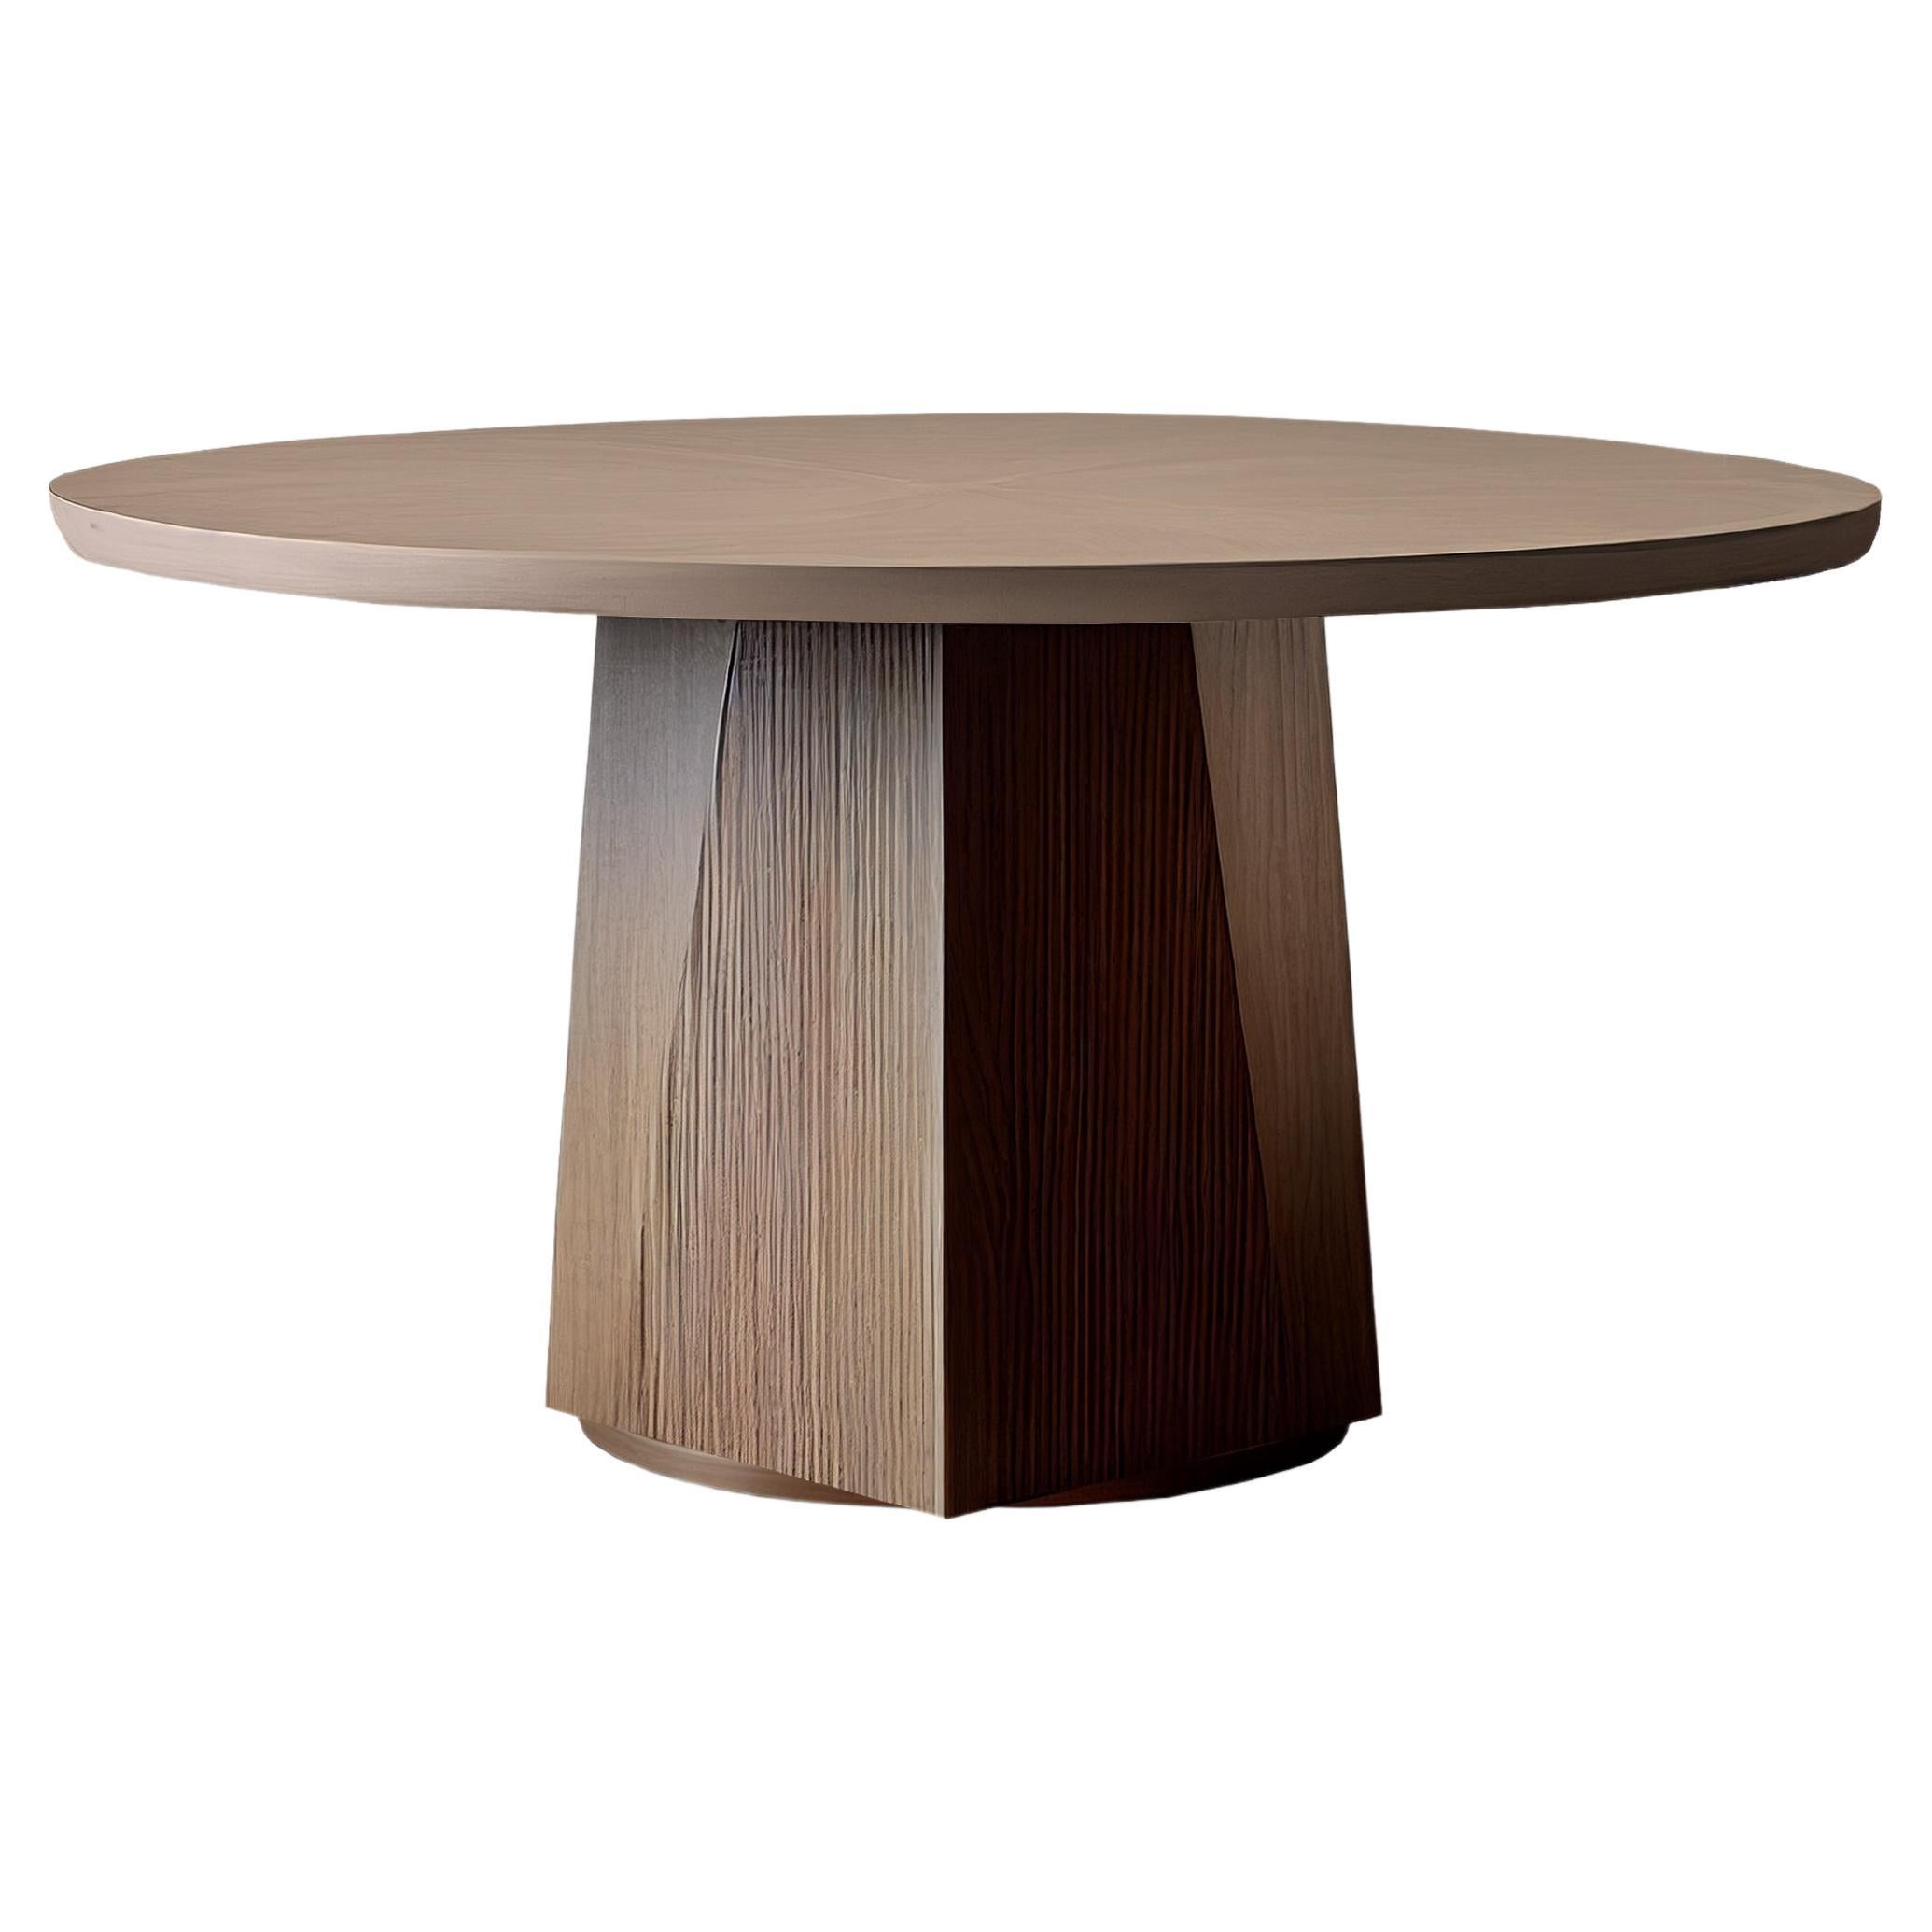 Scarpa Dining Table C, Round Table for 6 by Nono